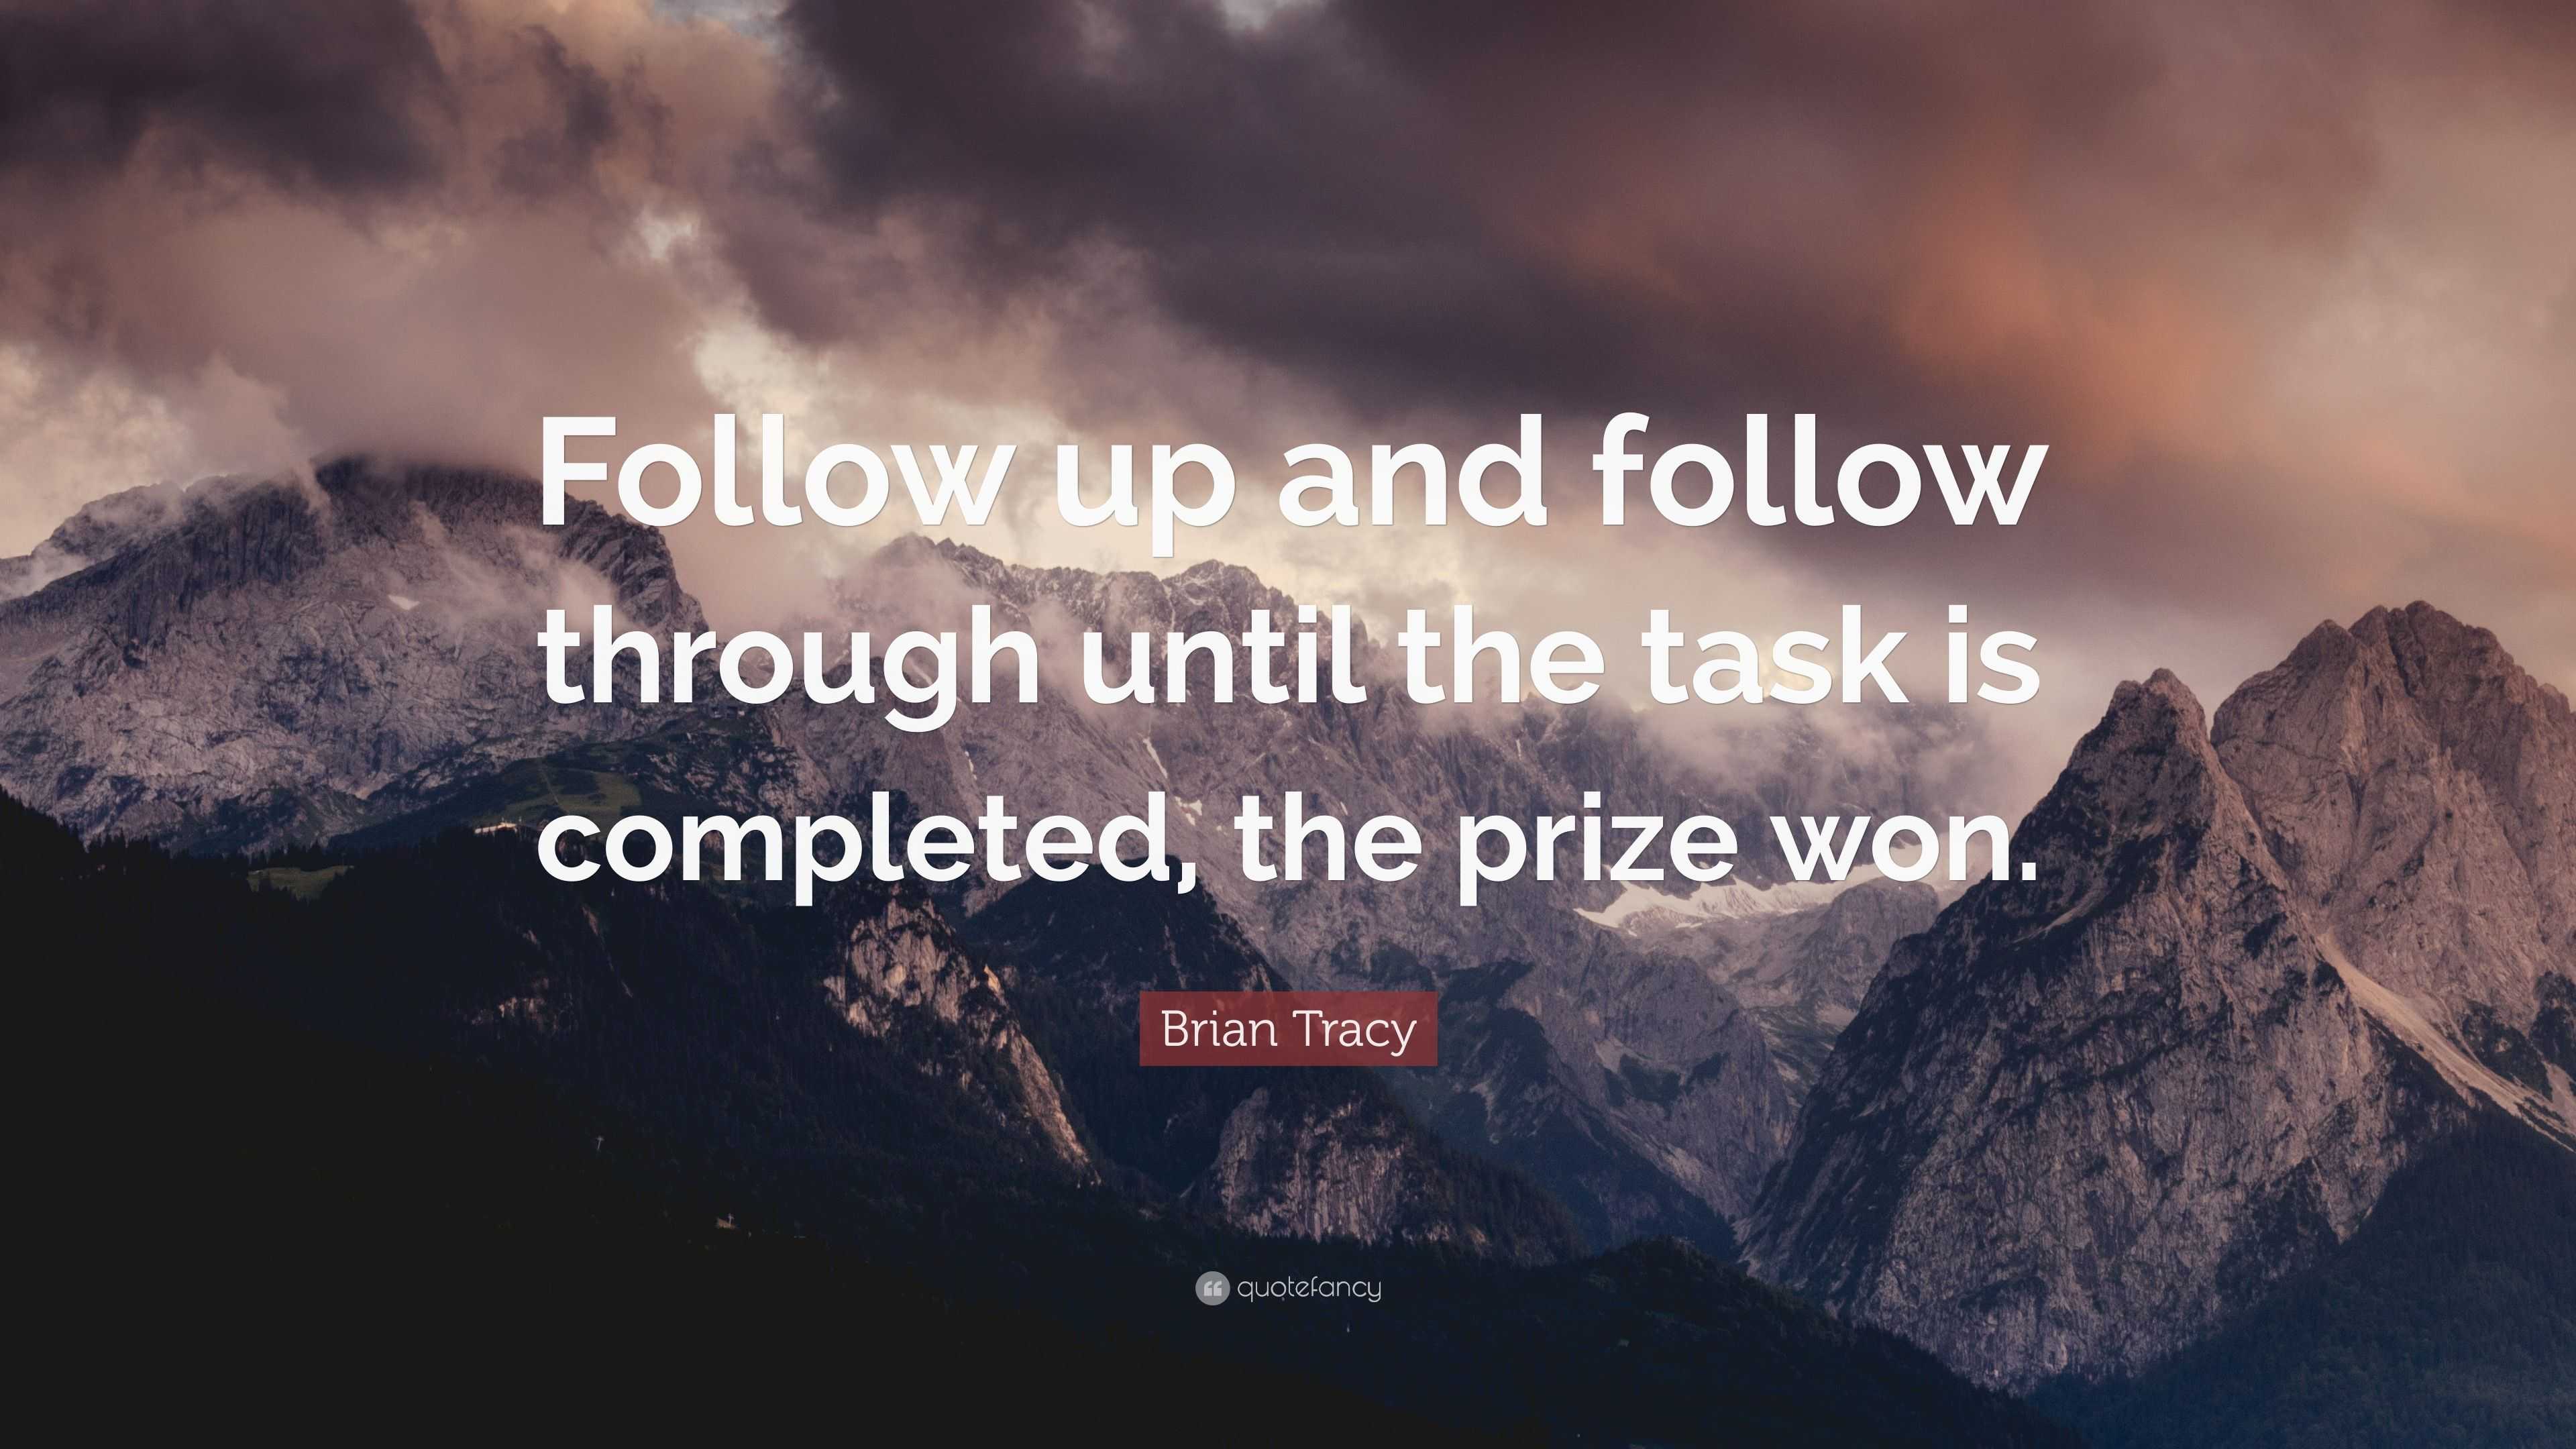 Brian Tracy Quote: “Follow up and follow through until the task is